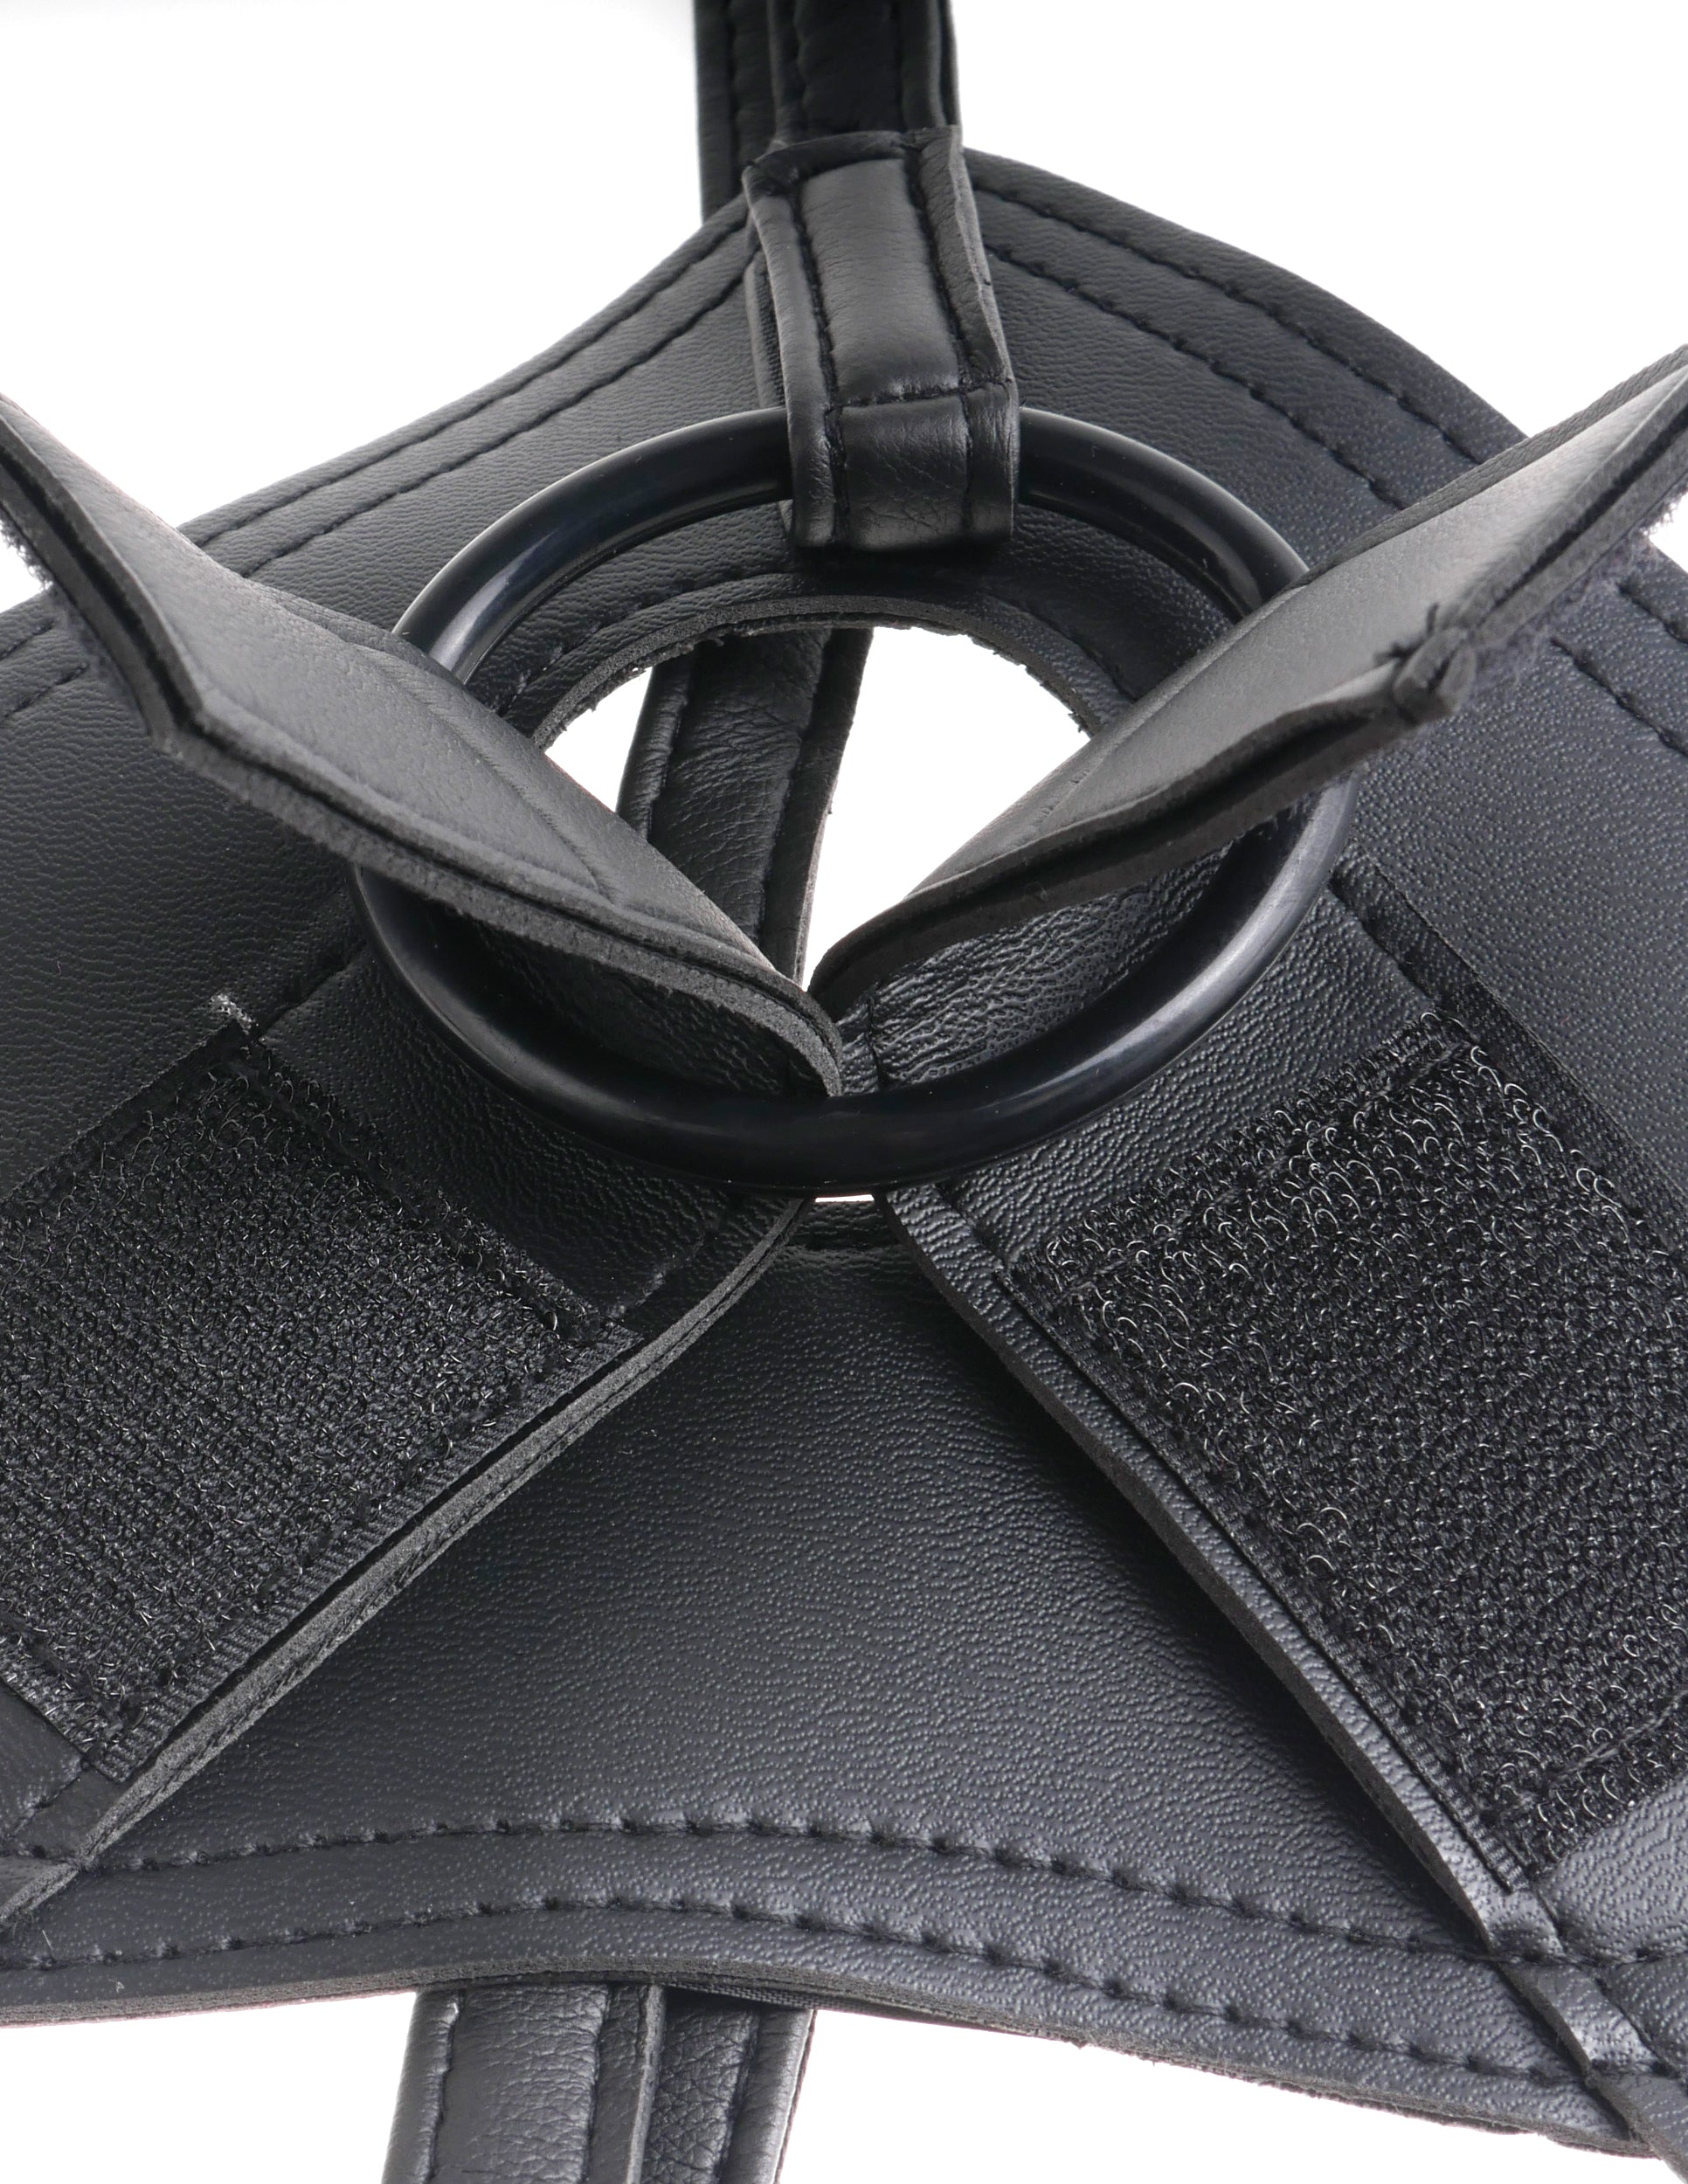 King Cock Strap On Harness W- 8 In Cock Brown